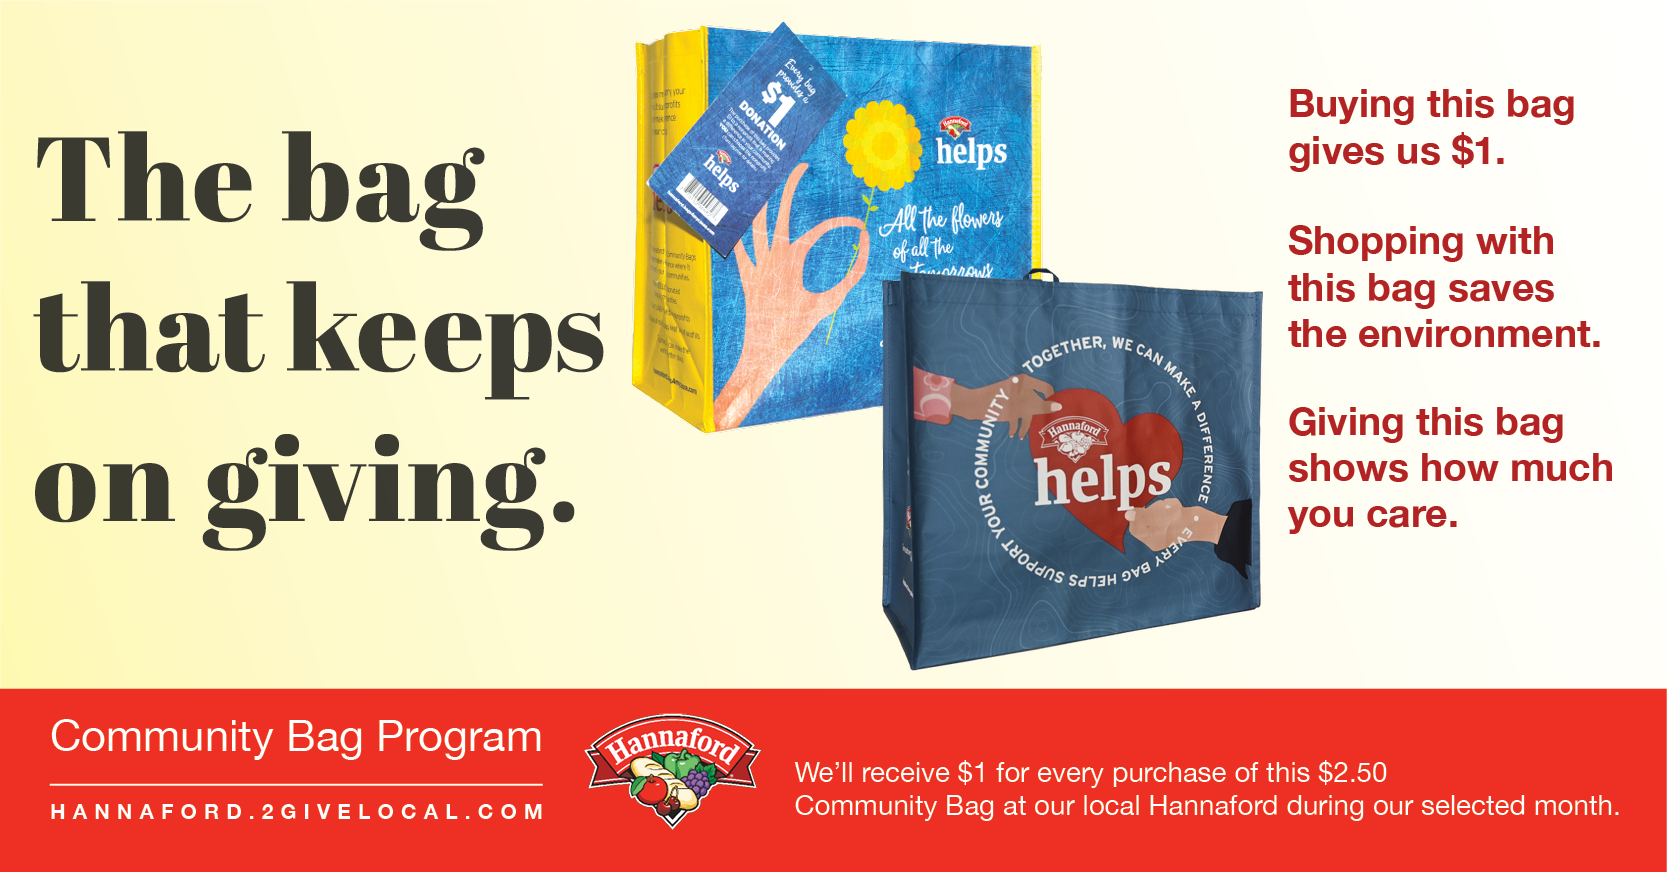 CFLR has been selected as December’s Hannaford Community Bag Program Beneficiary